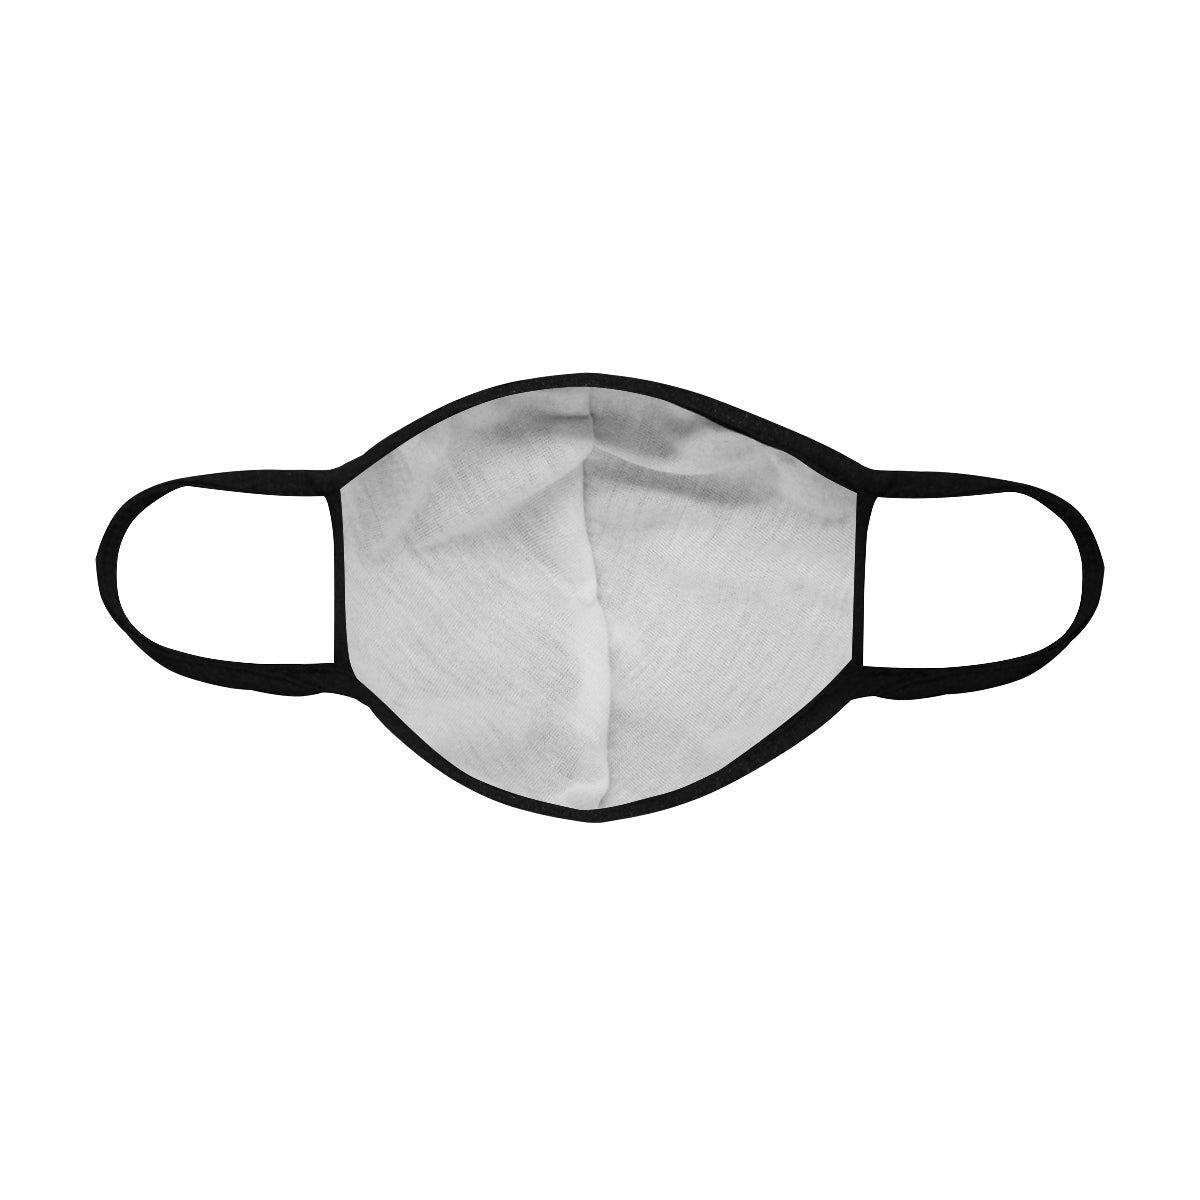 flyersetcinc Scarlet Galaxy Cotton Fabric Face Mask (30 Filters Included) - Non-medical use